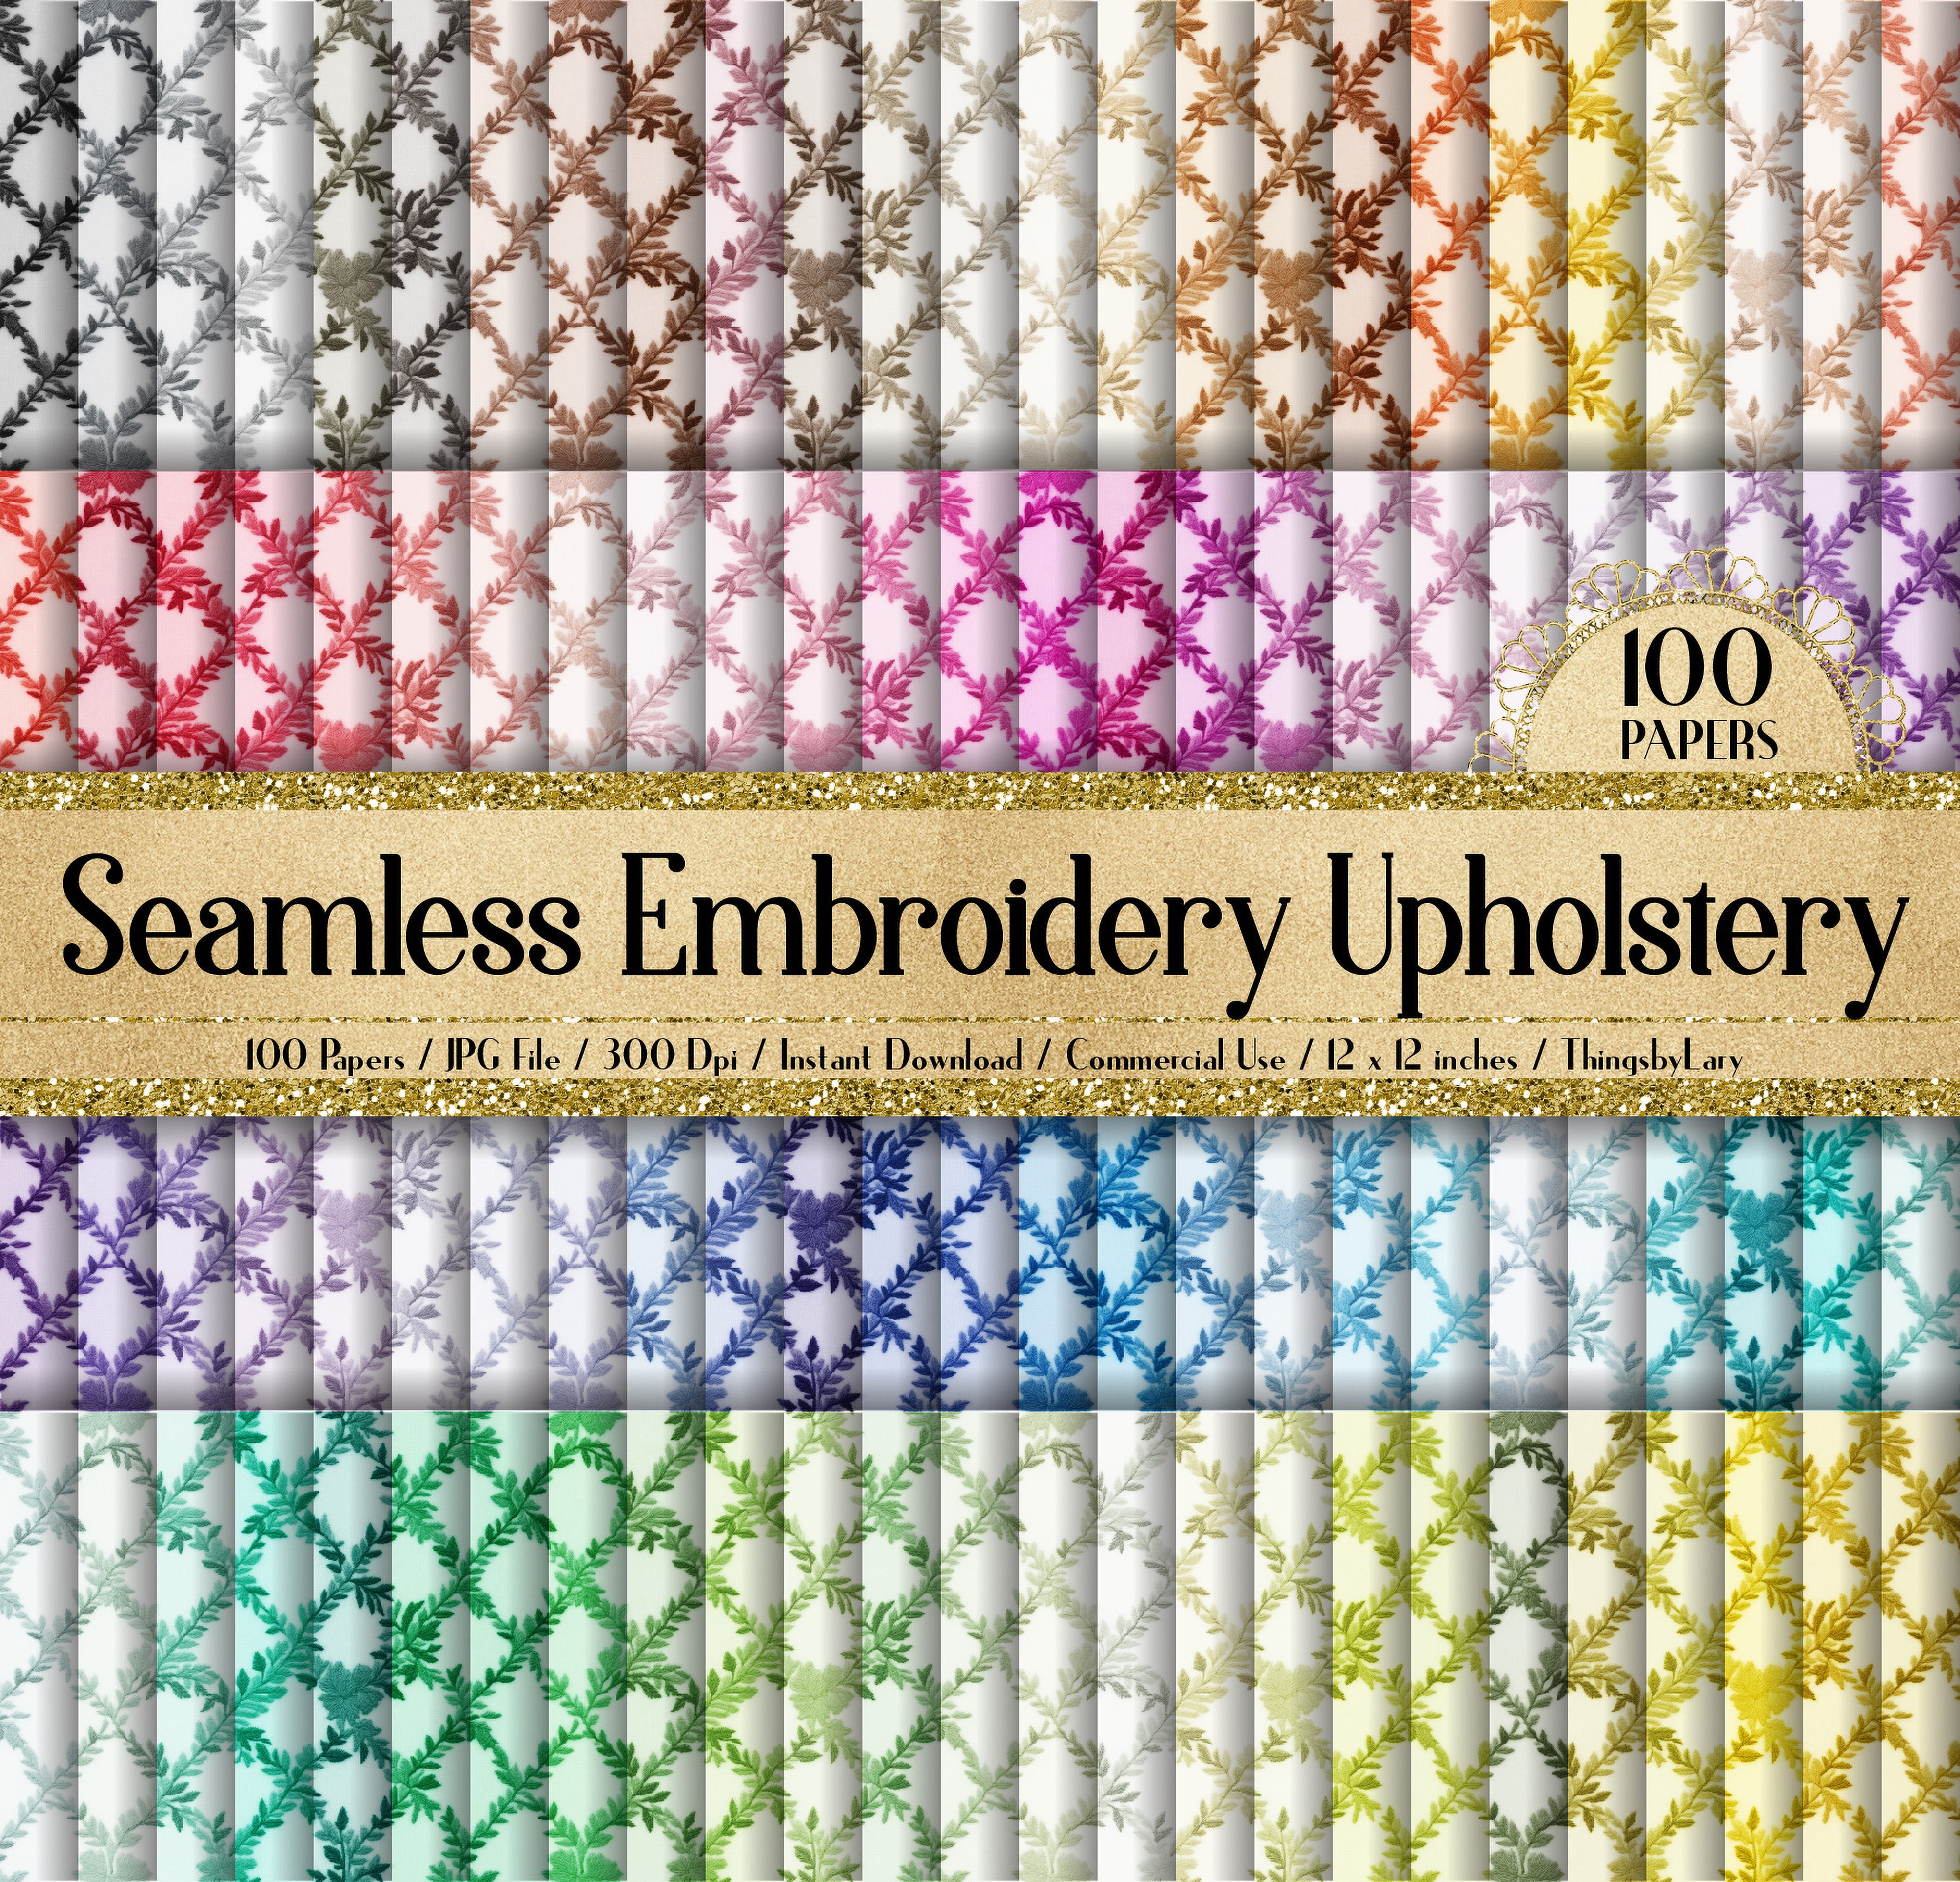 100 Seamless Embroidery Botanical Upholstery Digital Papers